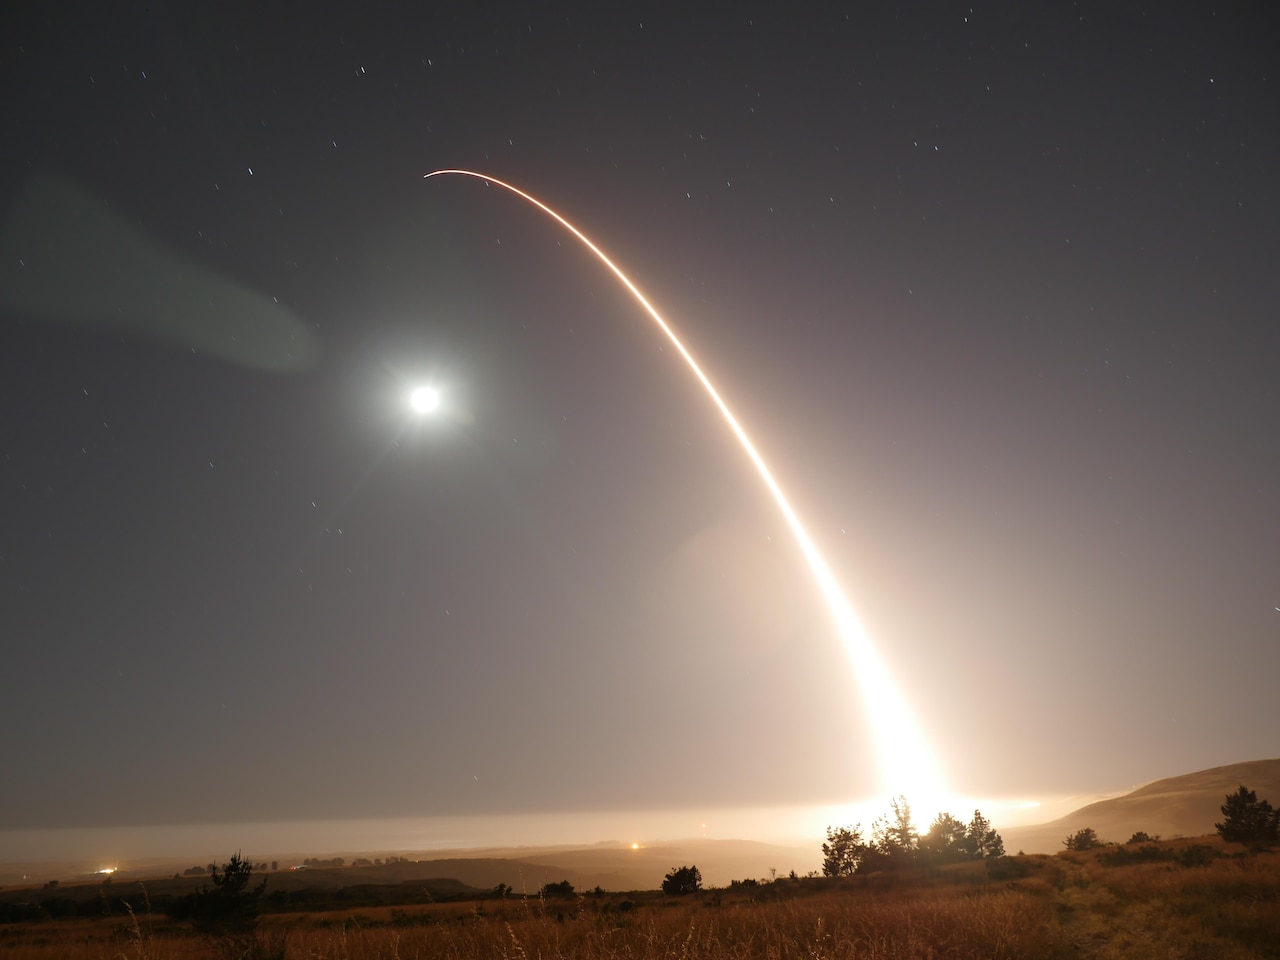 An unarmed Minuteman III intercontinental ballistic missile launches during an operational test at 12:02 a.m. Pacific Daylight Time Wednesday, May 3, 2017, at Vandenberg Air Force Base, Calif. (U.S. Air Force photo by 2nd Lt. William Collette)